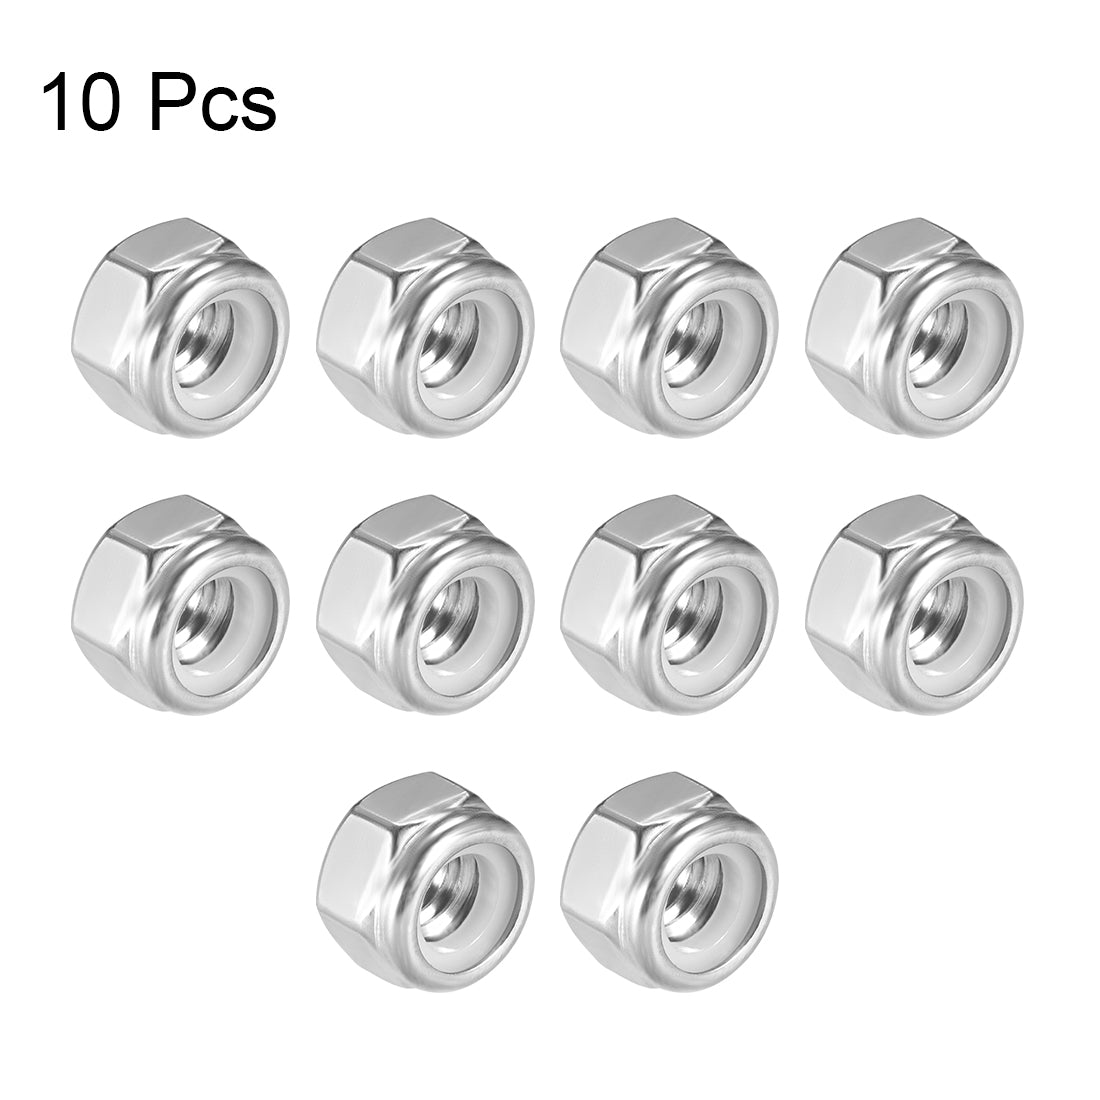 uxcell Uxcell 5/16"-18 Nylon Insert Hex Lock Nuts, 304 Stainless Steel, Plain Finish, 25 Pcs